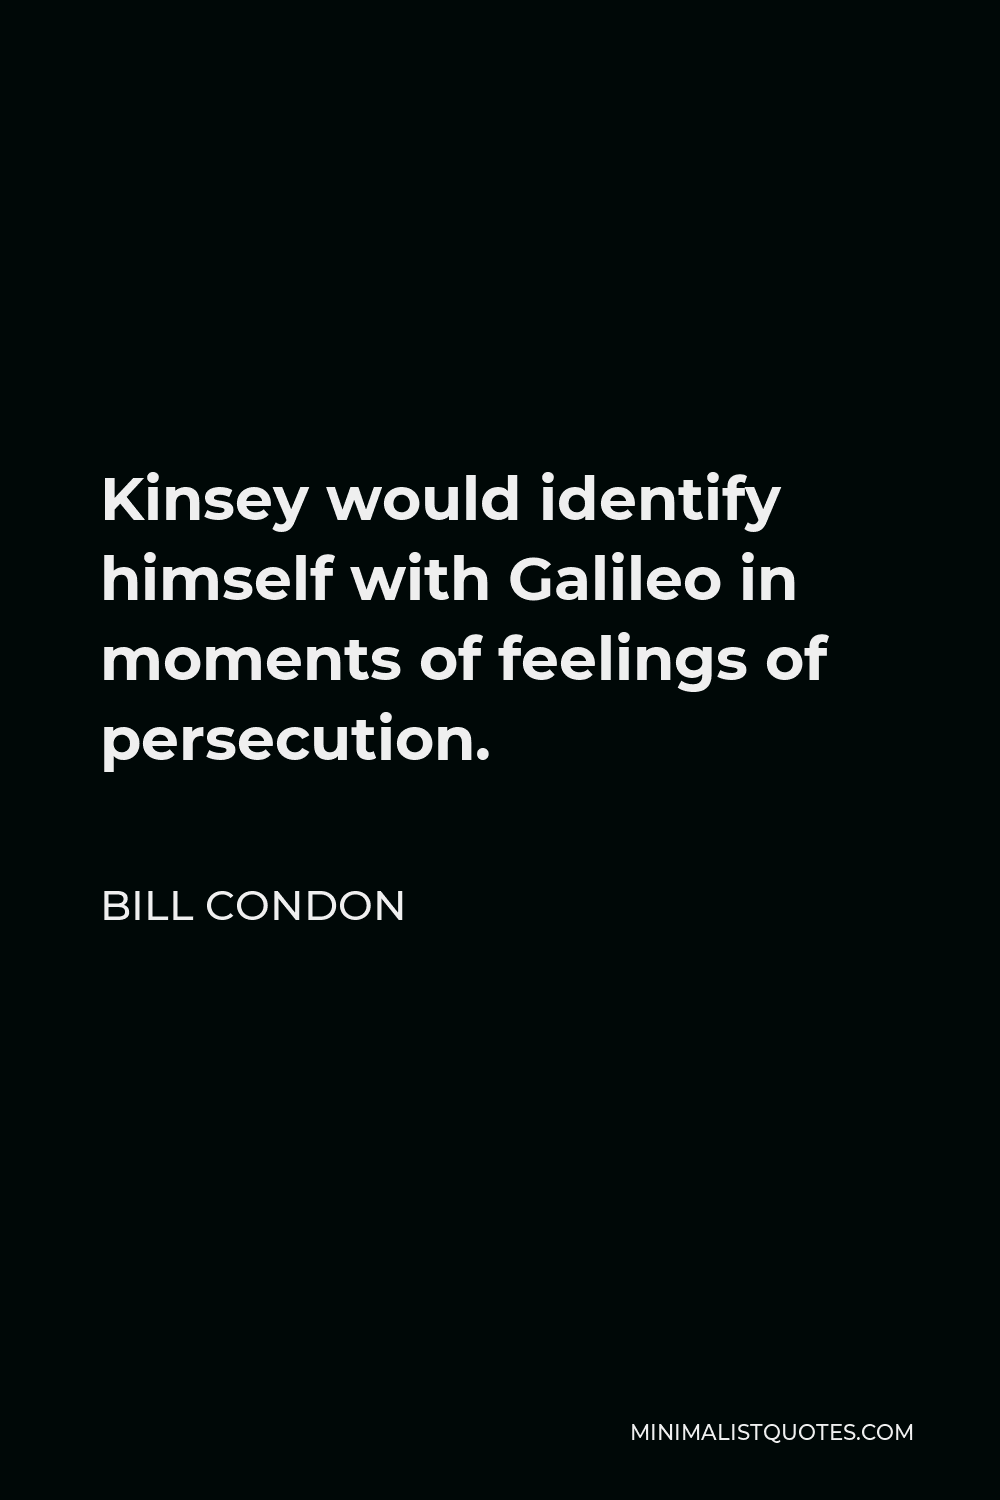 Bill Condon Quote - Kinsey would identify himself with Galileo in moments of feelings of persecution.